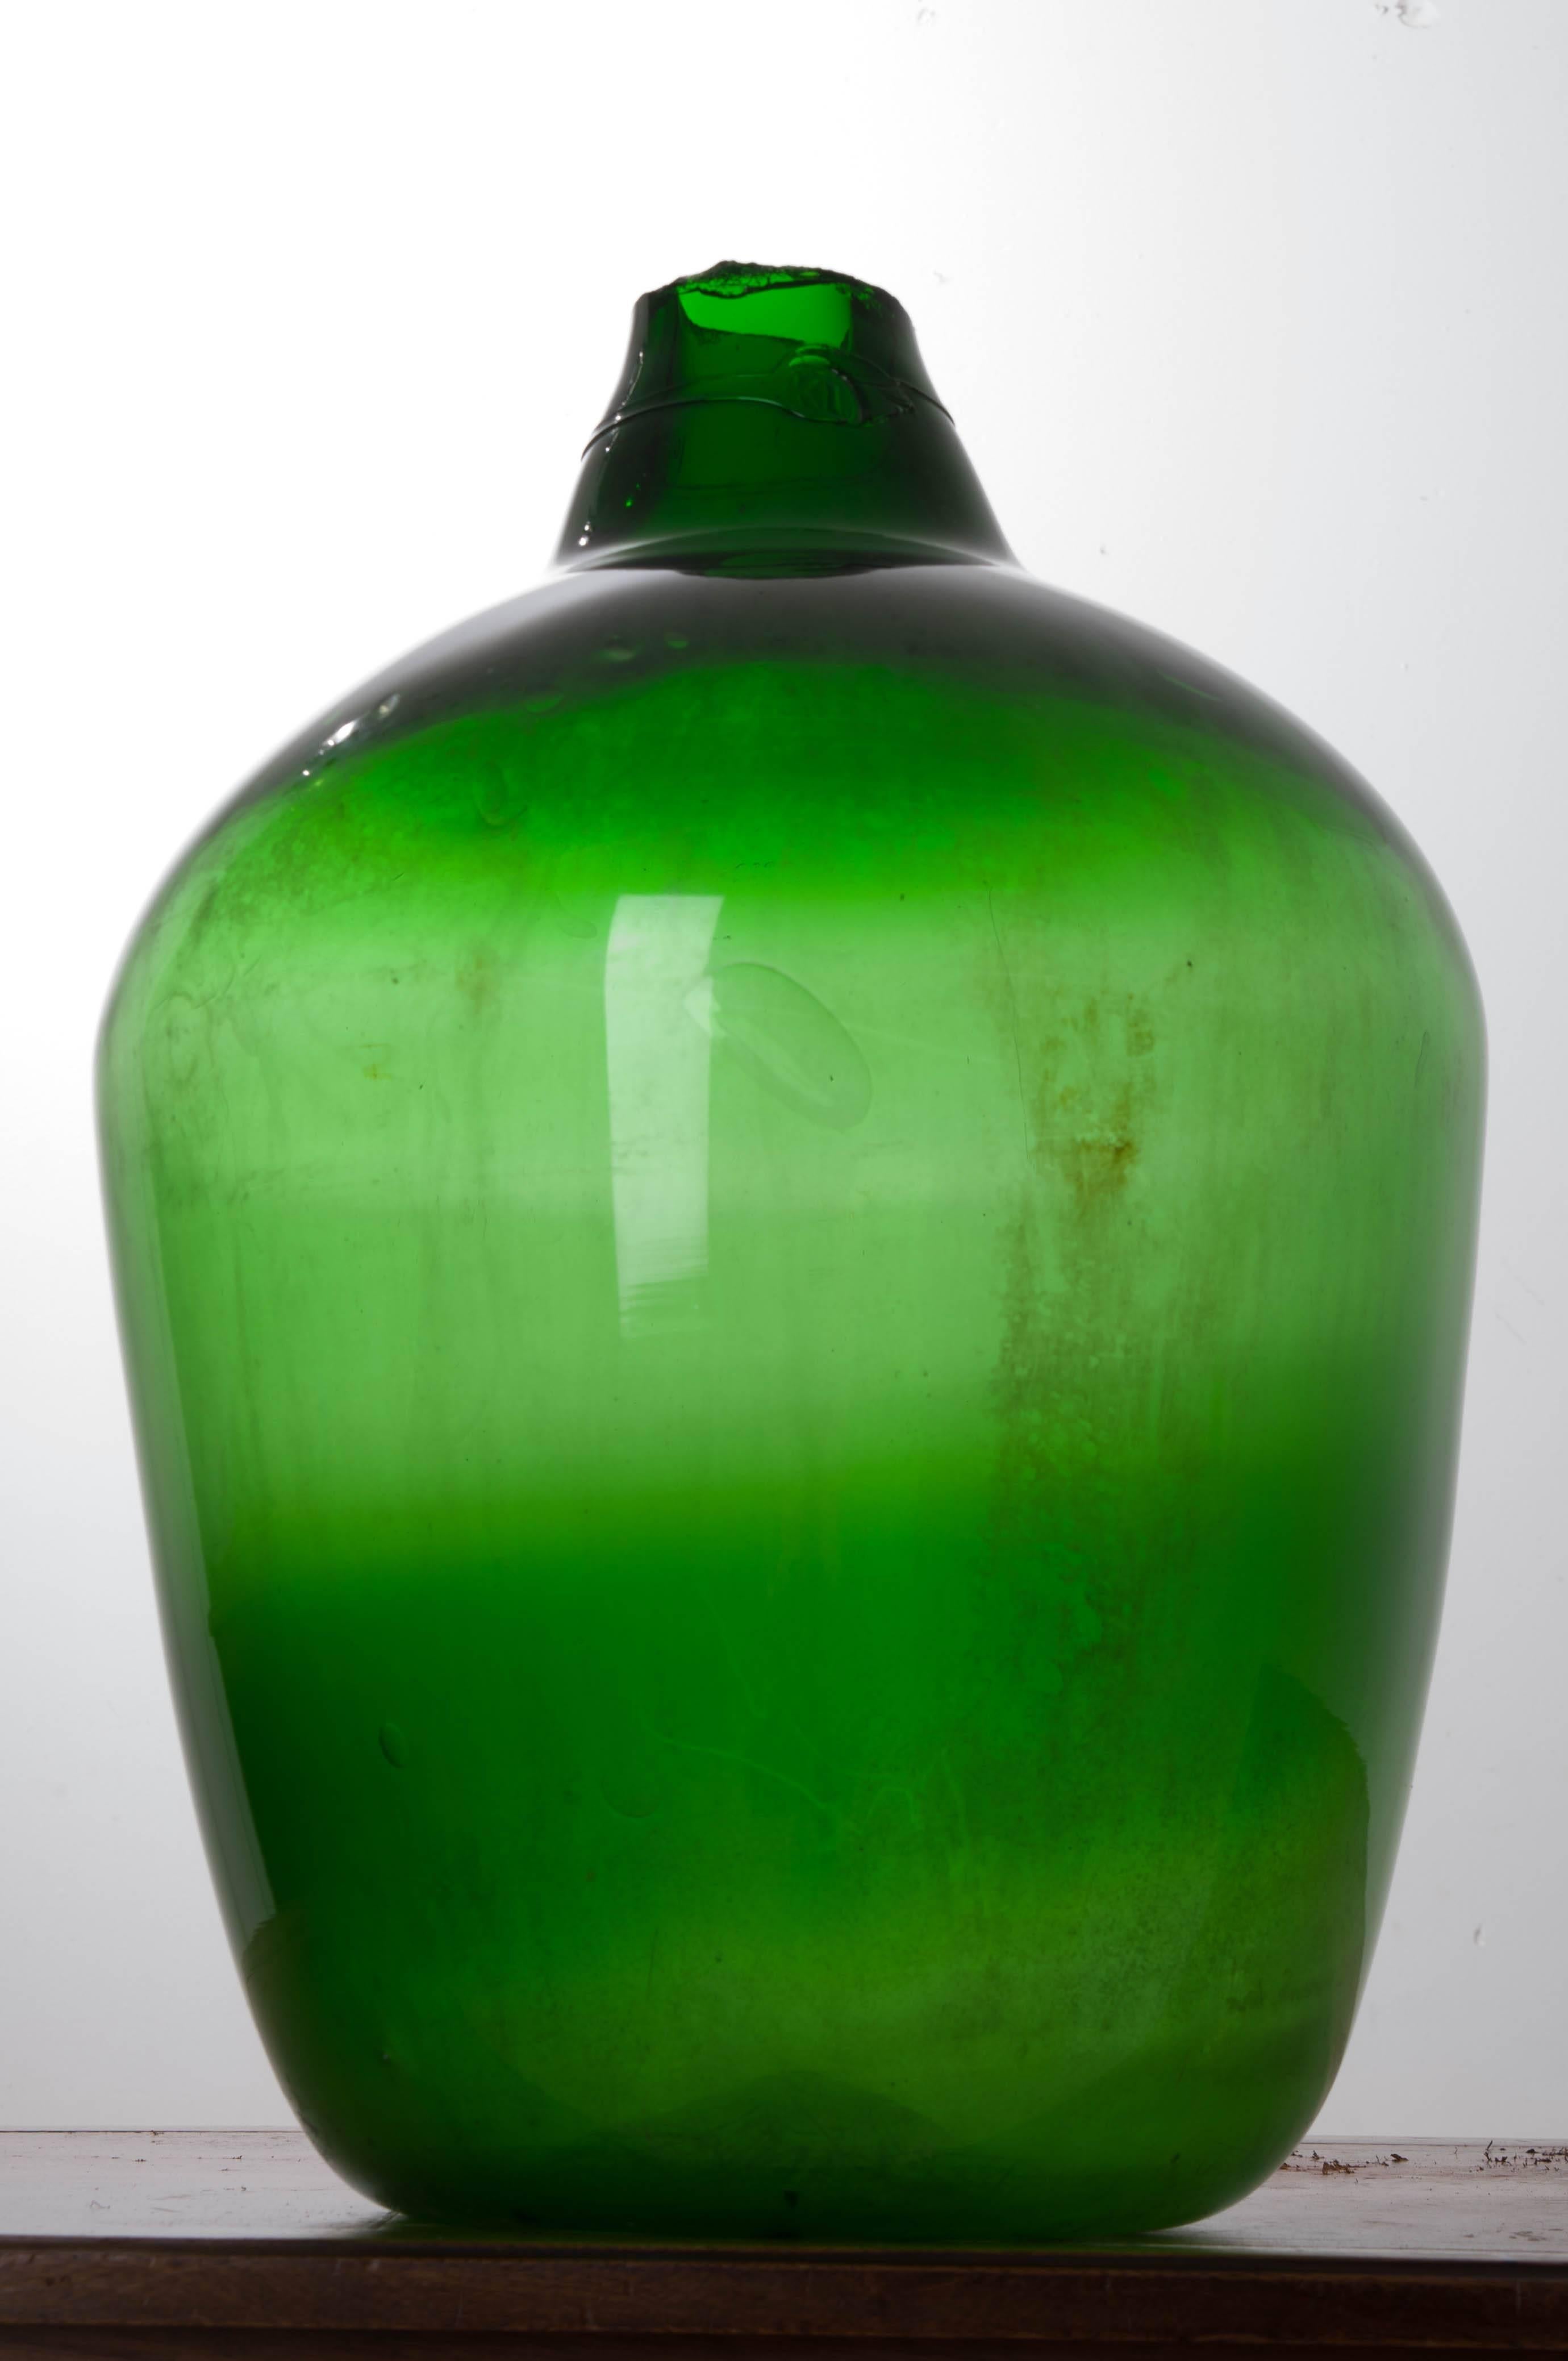 This large, green wine keg, also known as a demijohn or carboy, remains intact after almost 150 years. This vessel has a vivid emerald green color and high shoulder, setting it apart from other wine kegs. Still in wonderful condition, this piece